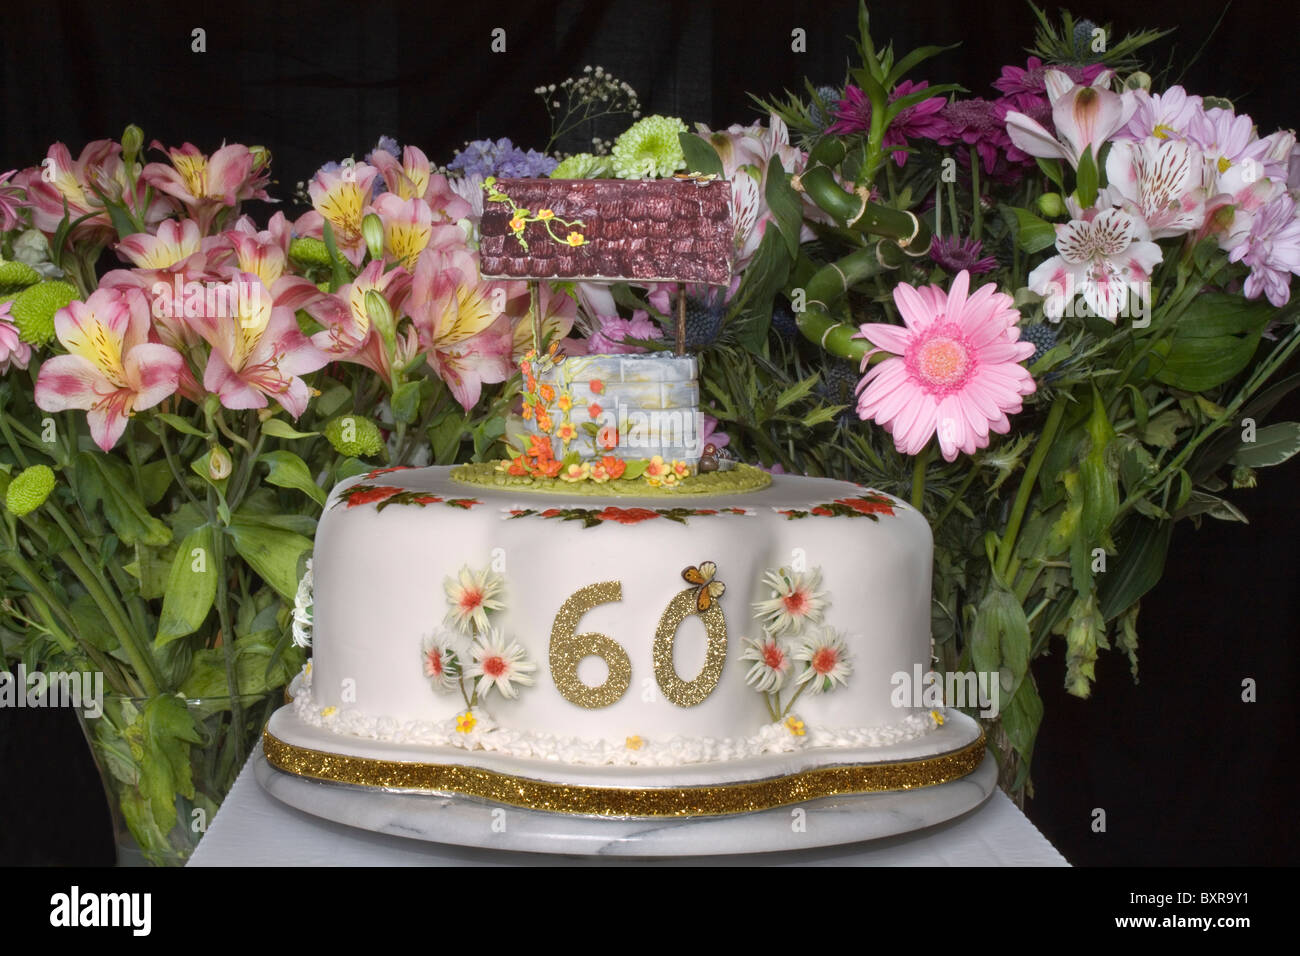 60th Birthday Cake High Resolution Stock Photography And Images Alamy